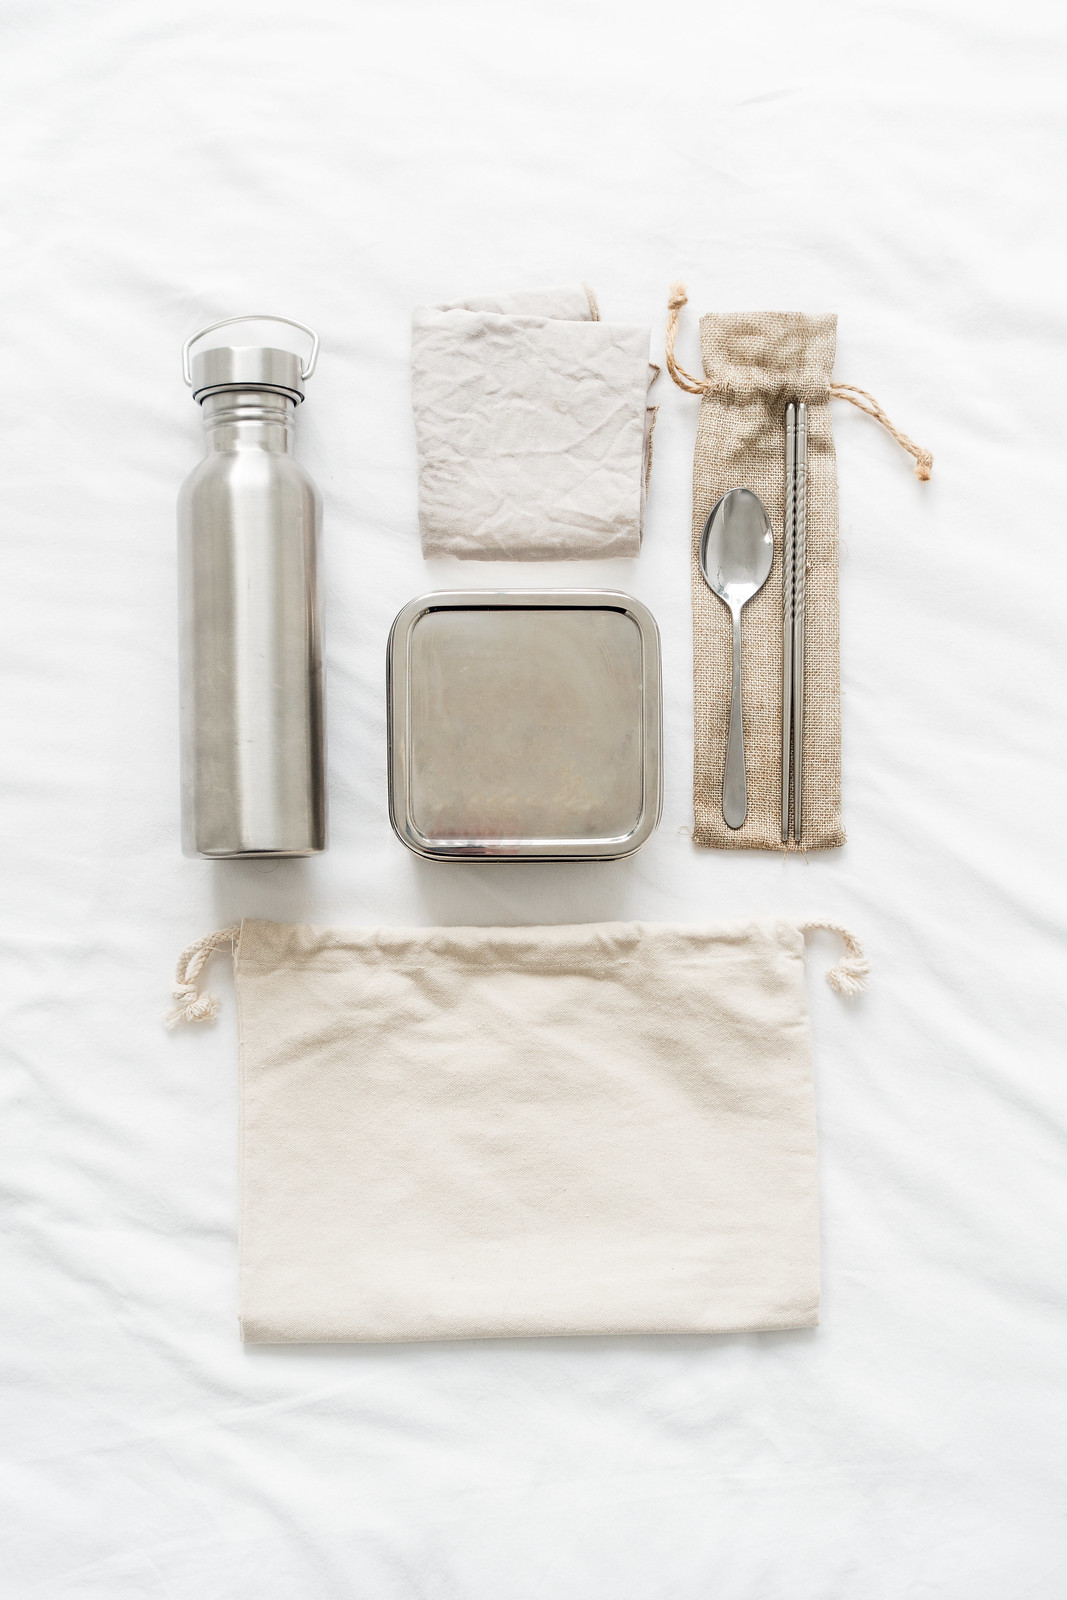 Packing For A Zero Waste Road Trip